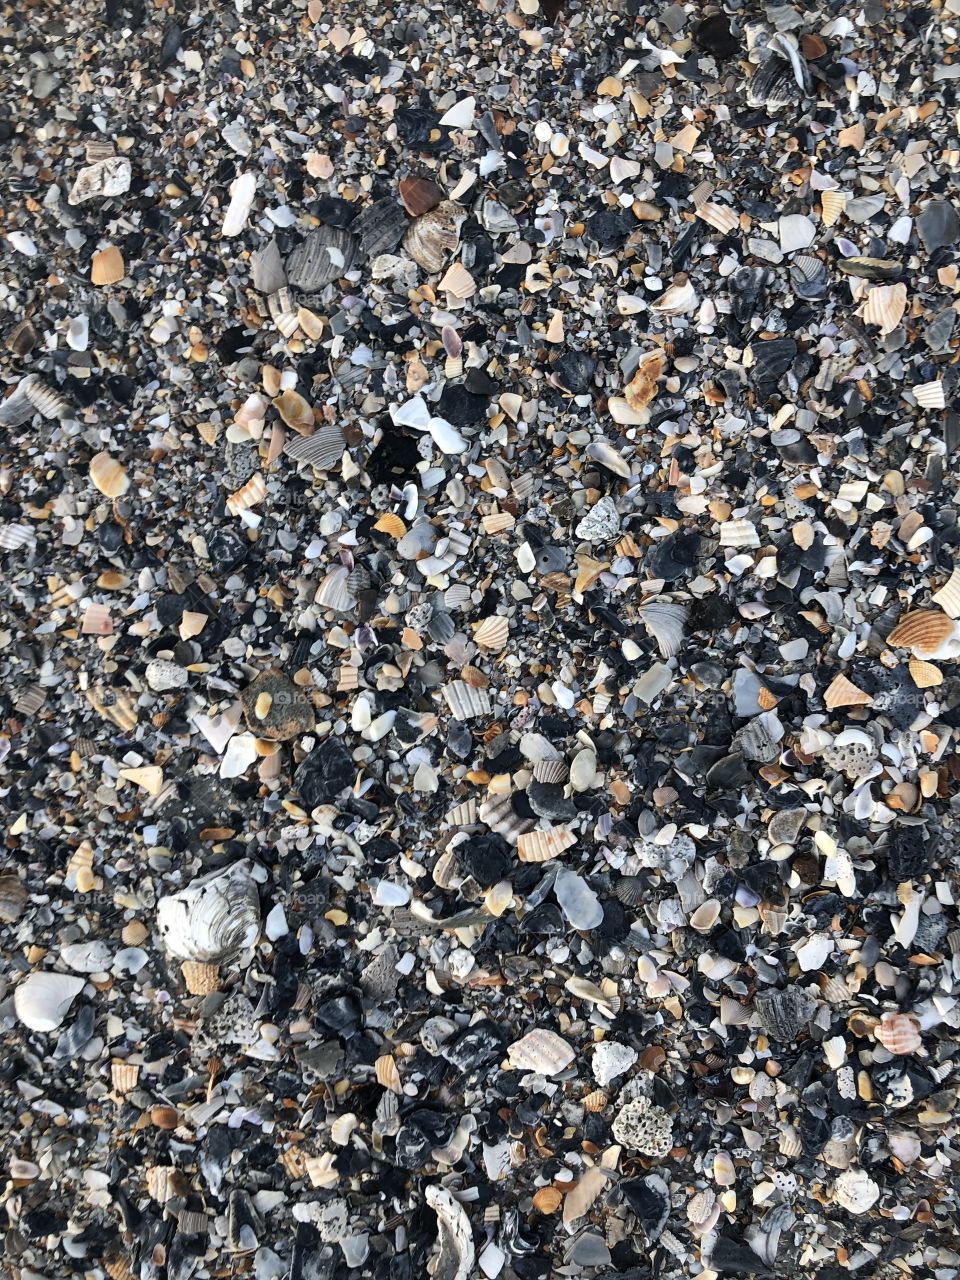 This beautiful collection of gravel, sand and seashells along Myrtle Beach embodiments just how amazing nature can be. 